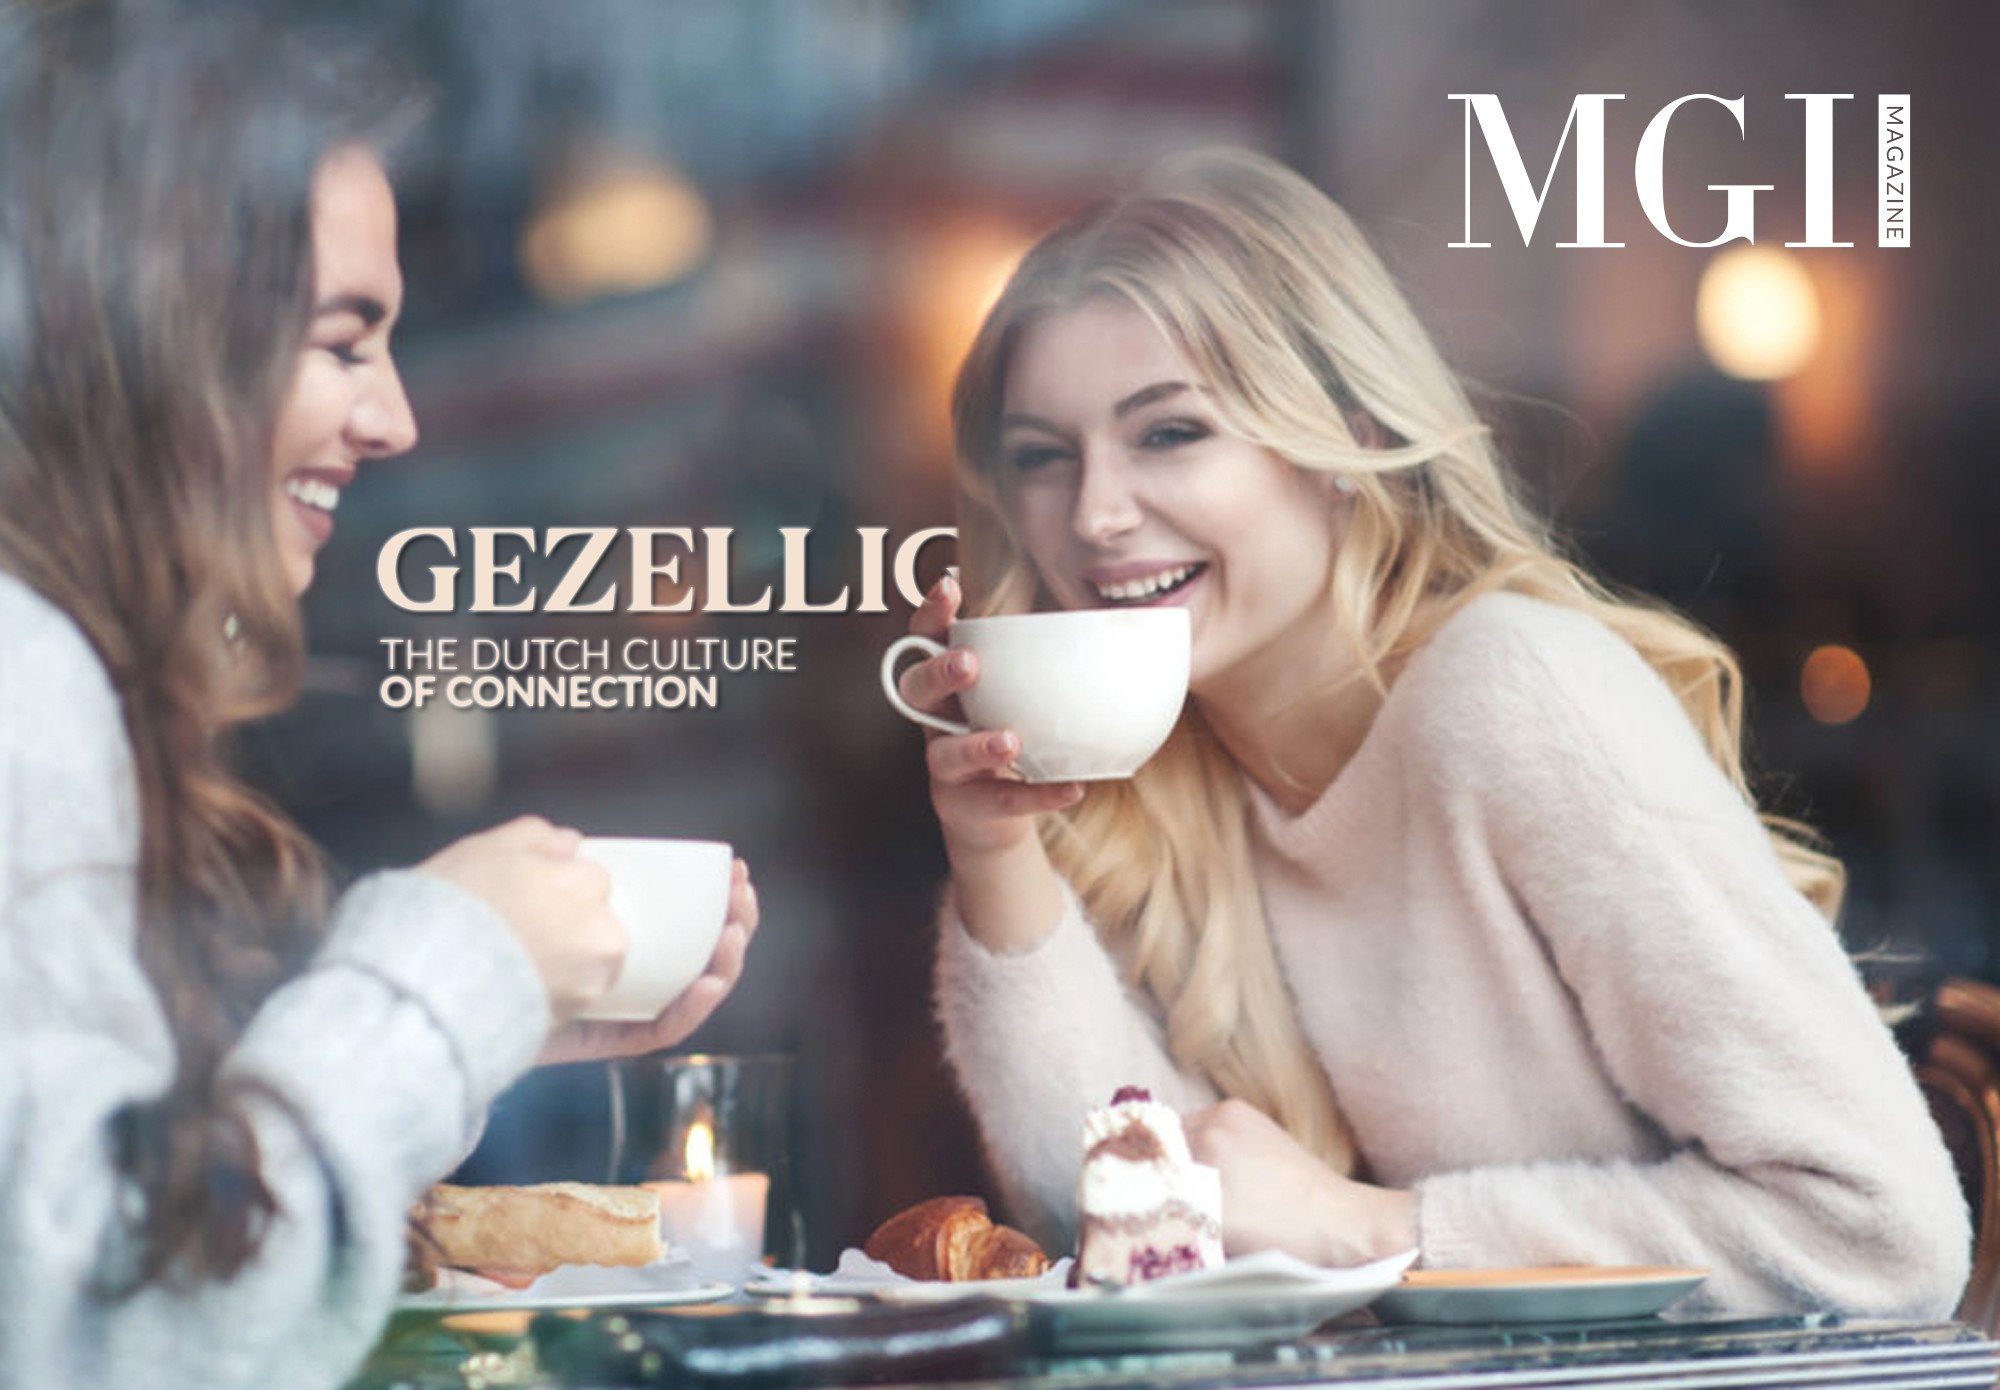 Gezellig - The Dutch Culture of Connection